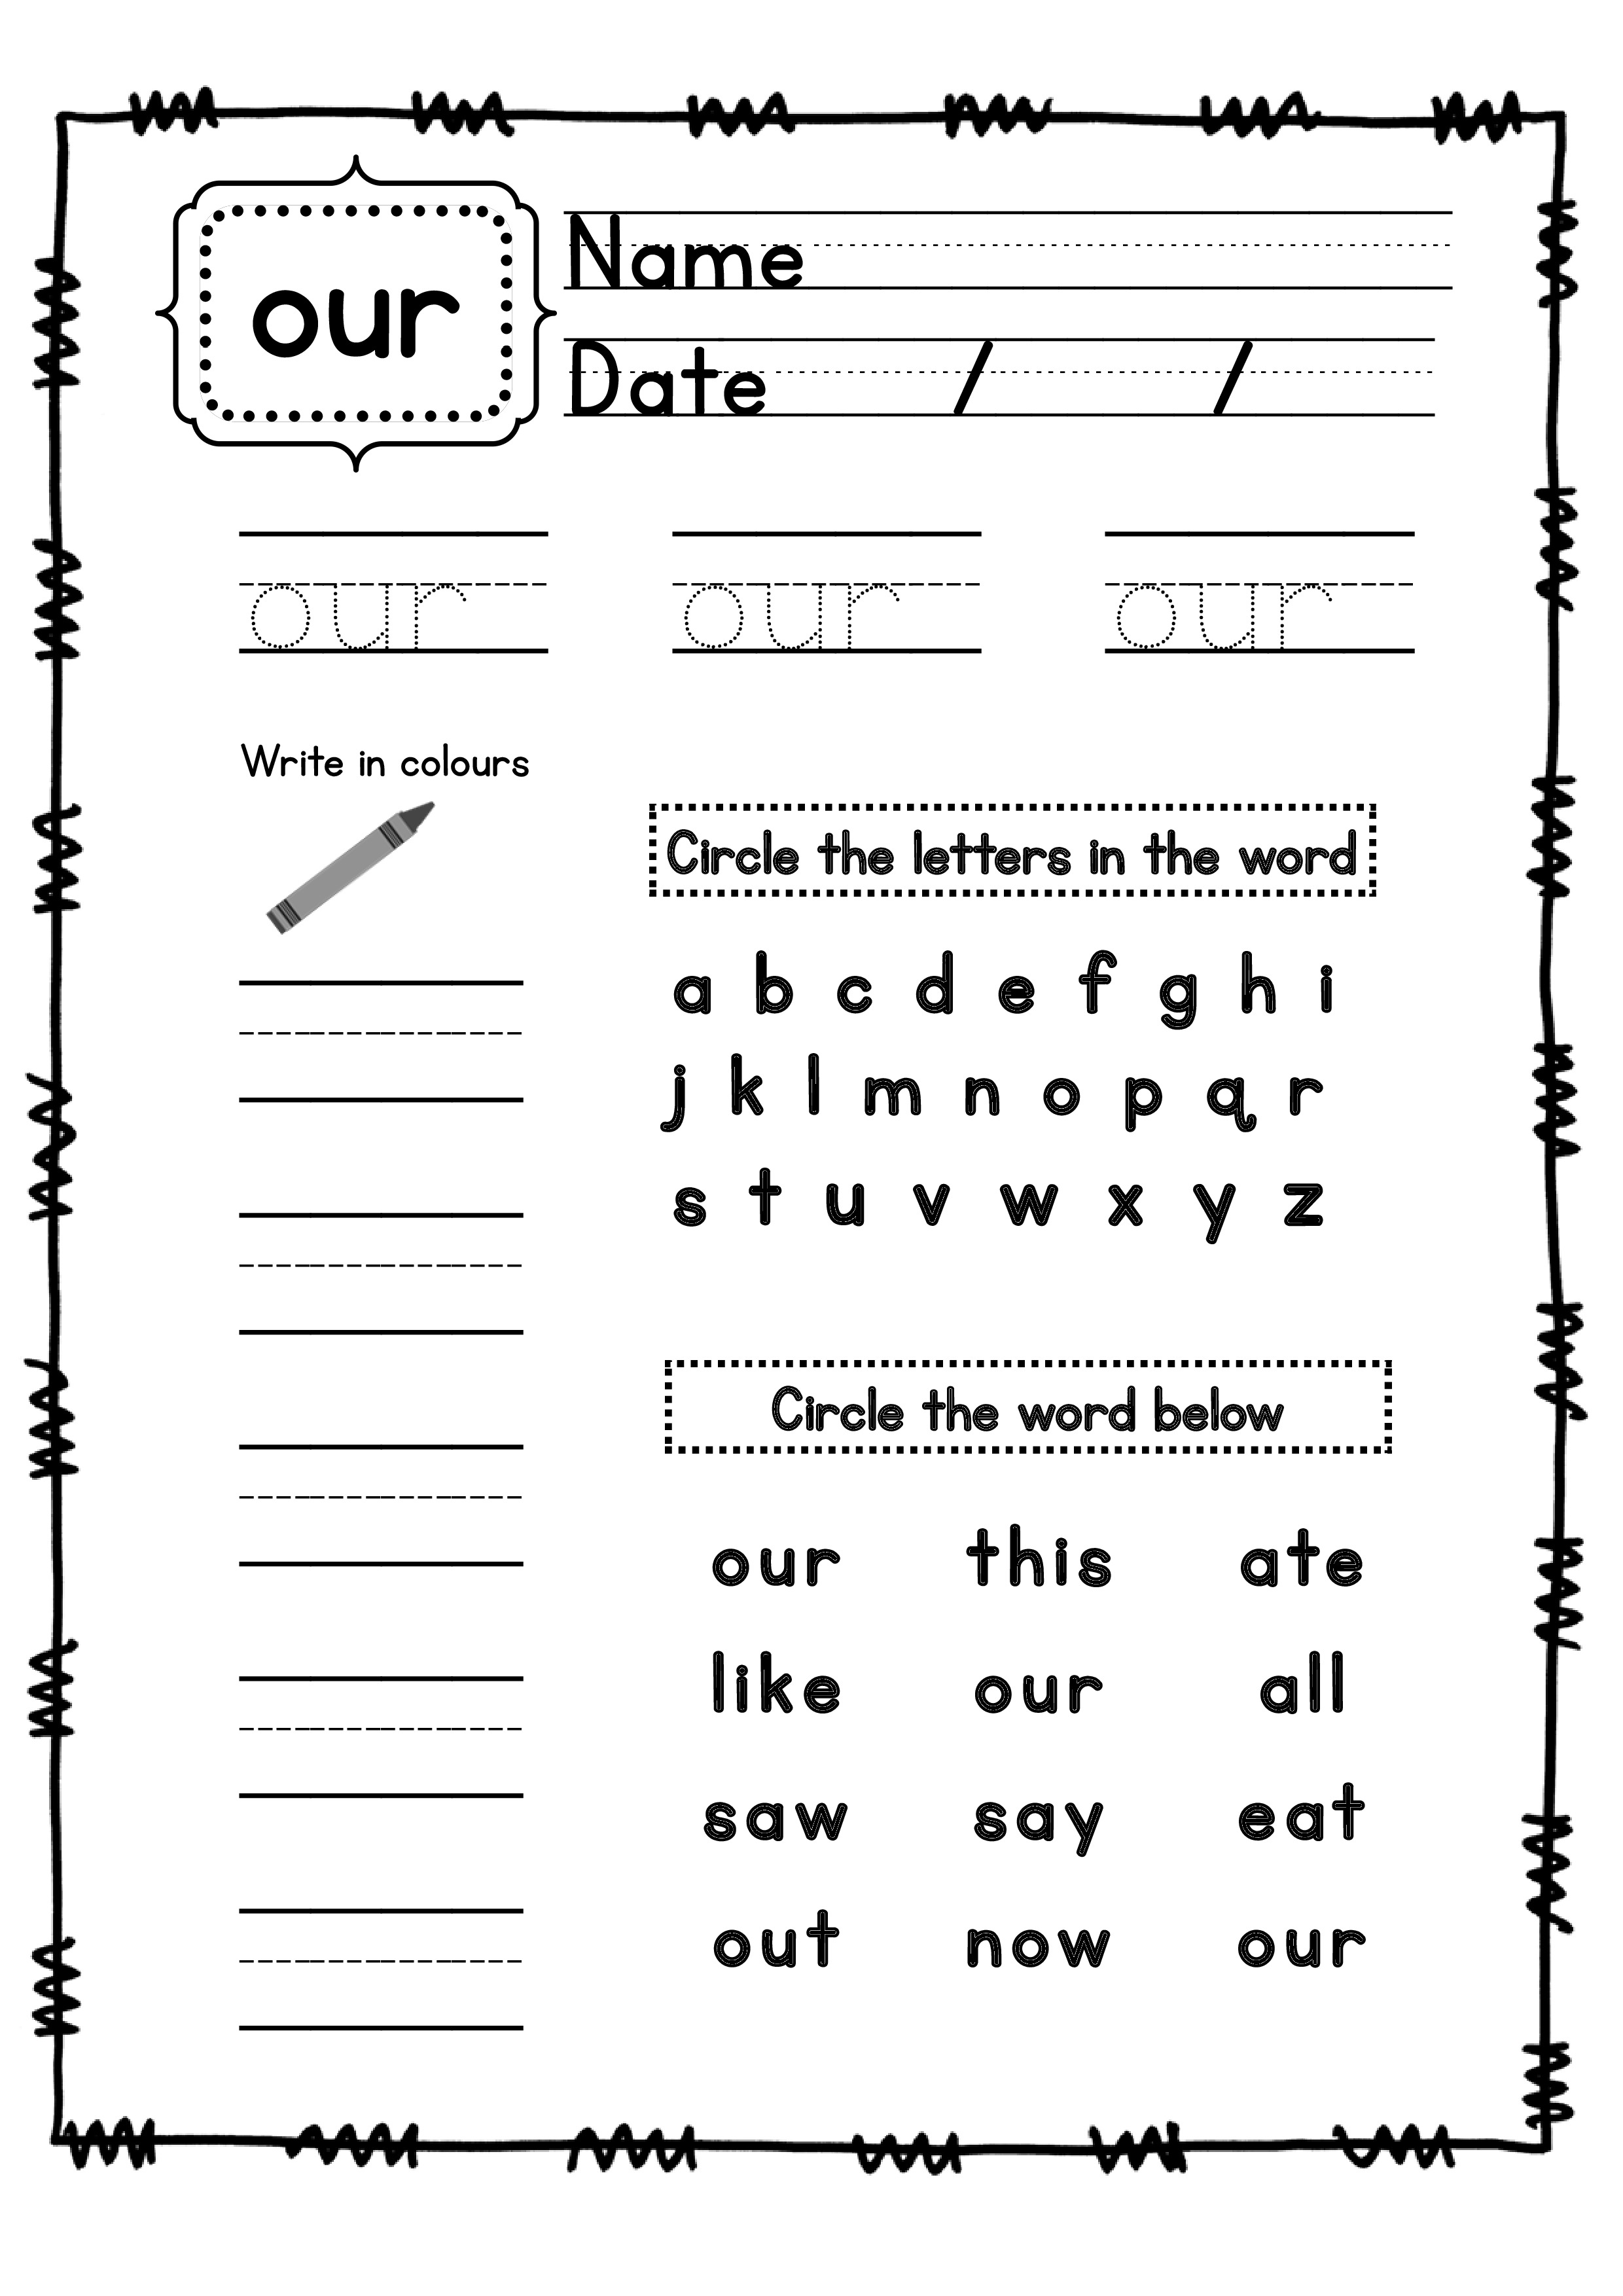 our includes all of  primer pdf word words sight The  52 sight worksheets. word worksheets set